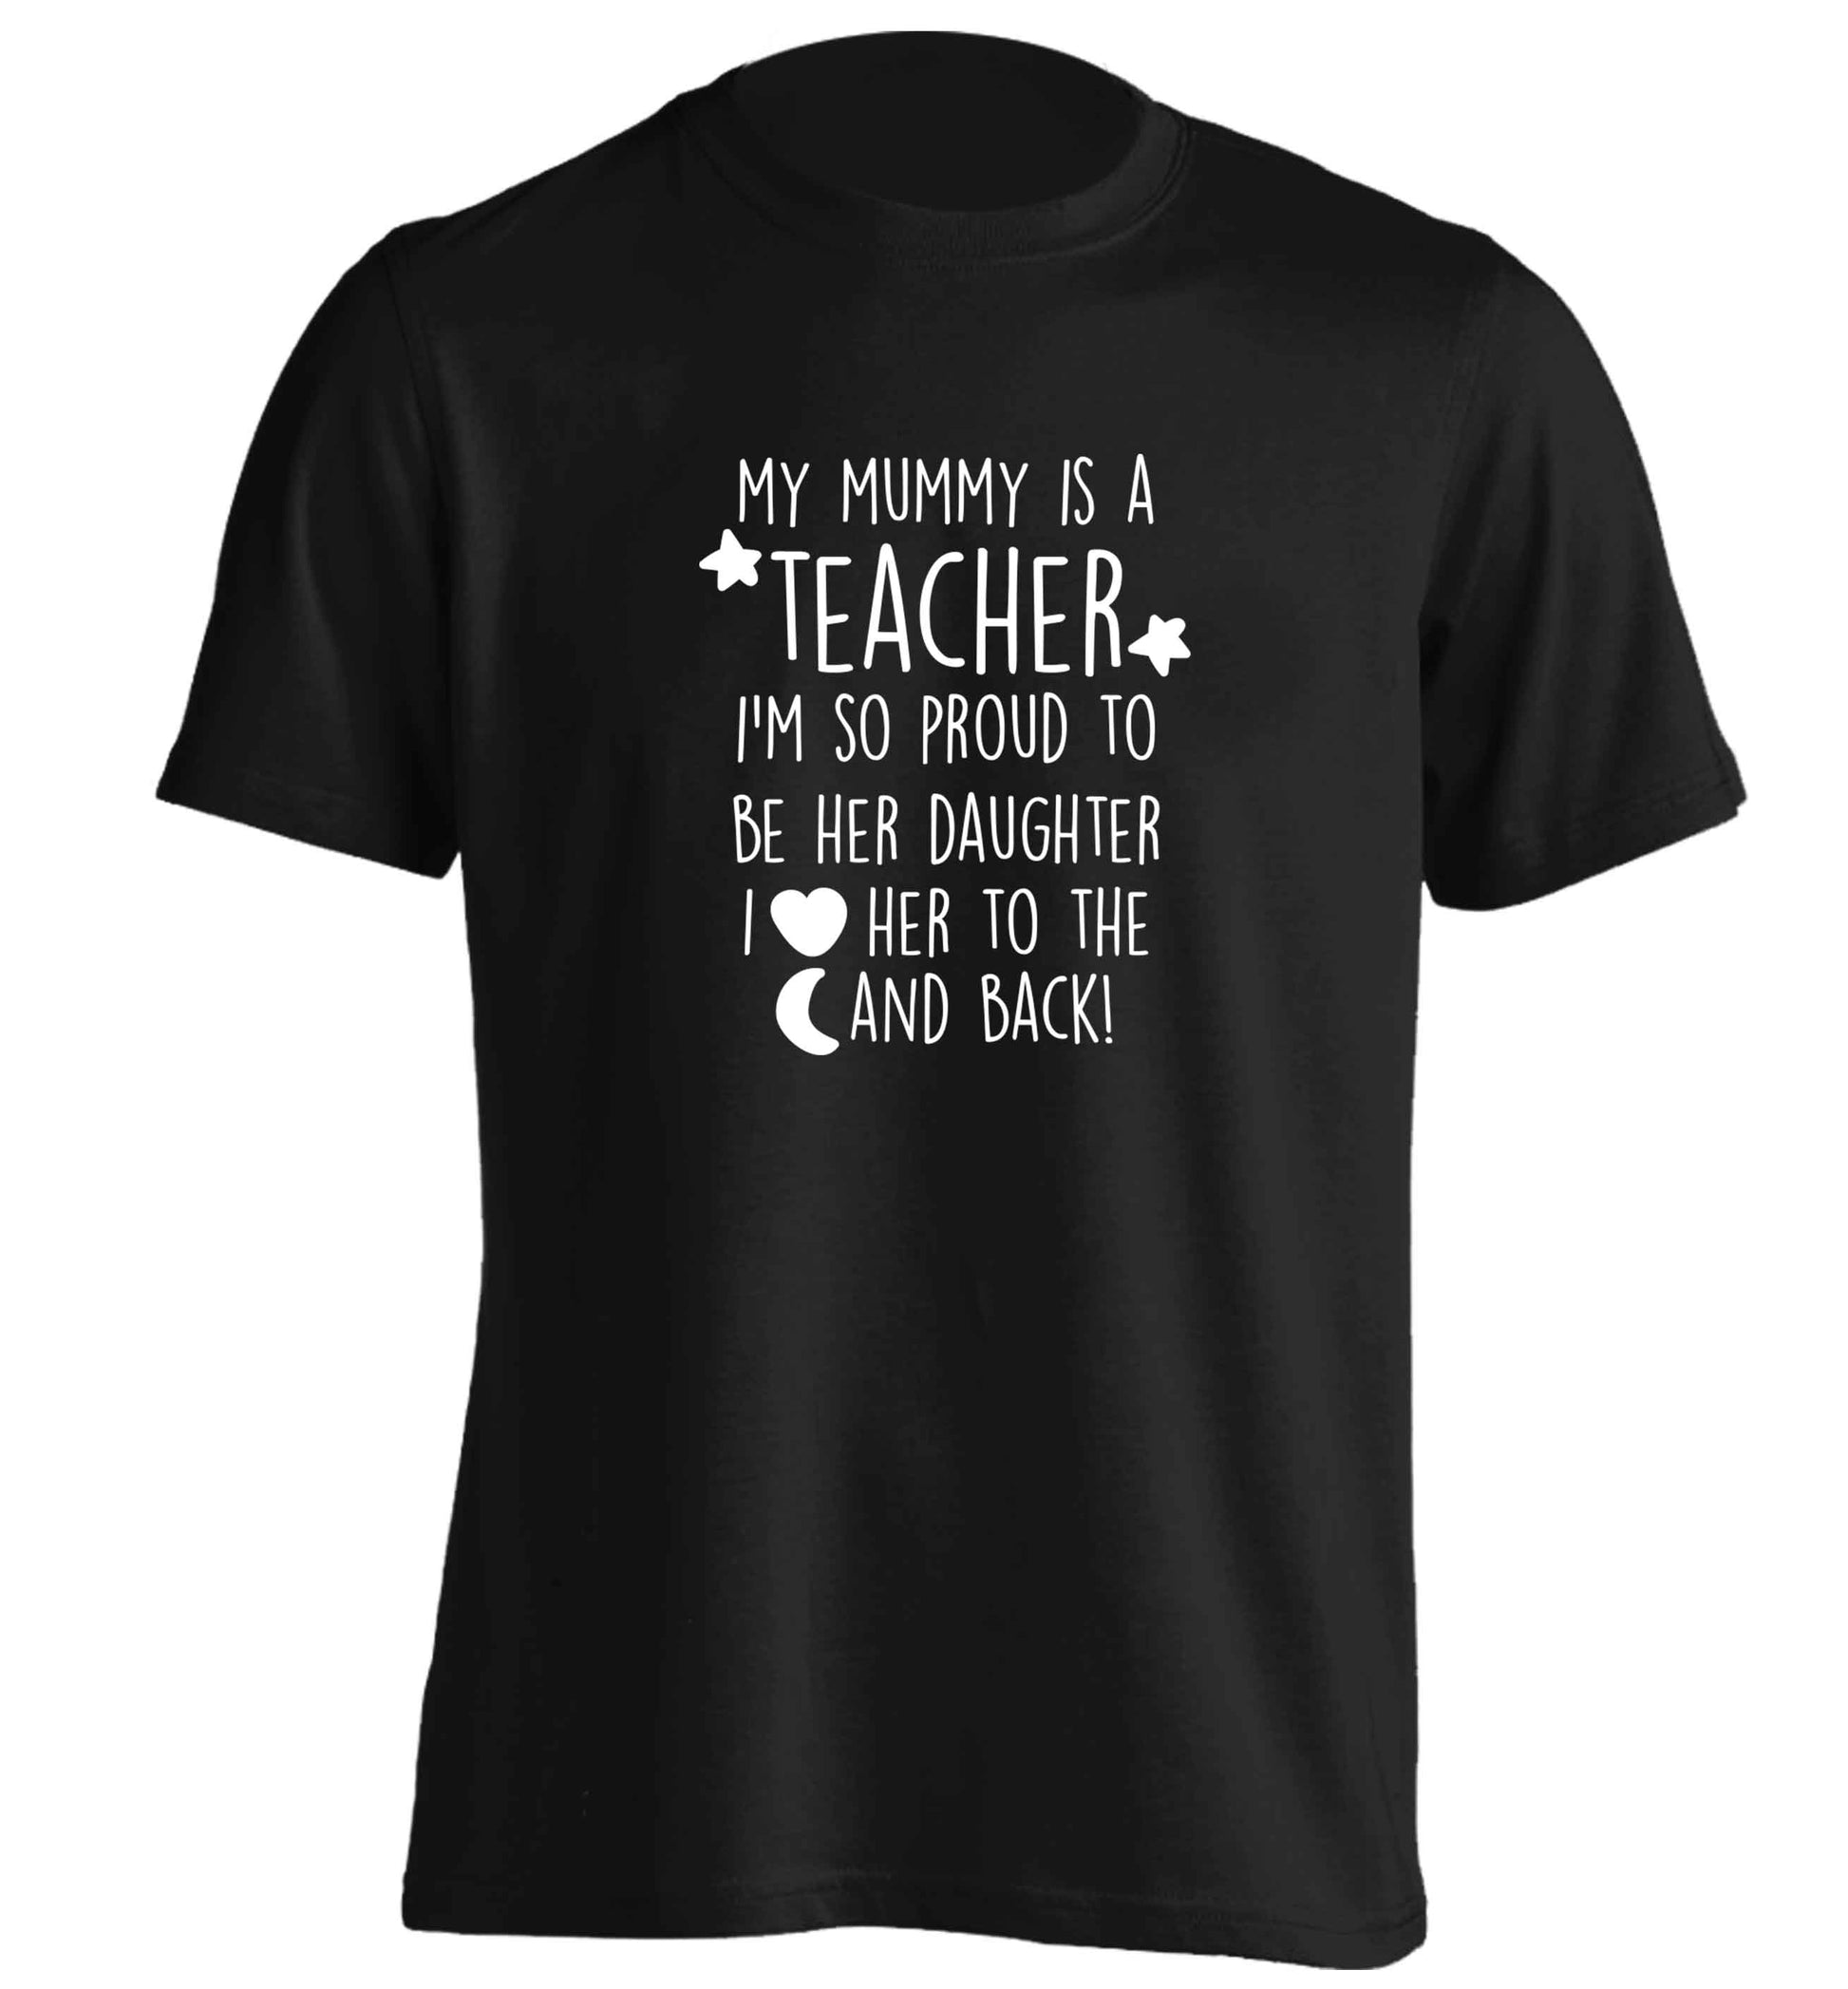 My mummy is a teacher I'm so proud to be her daughter I love her to the moon and back adults unisex black Tshirt 2XL